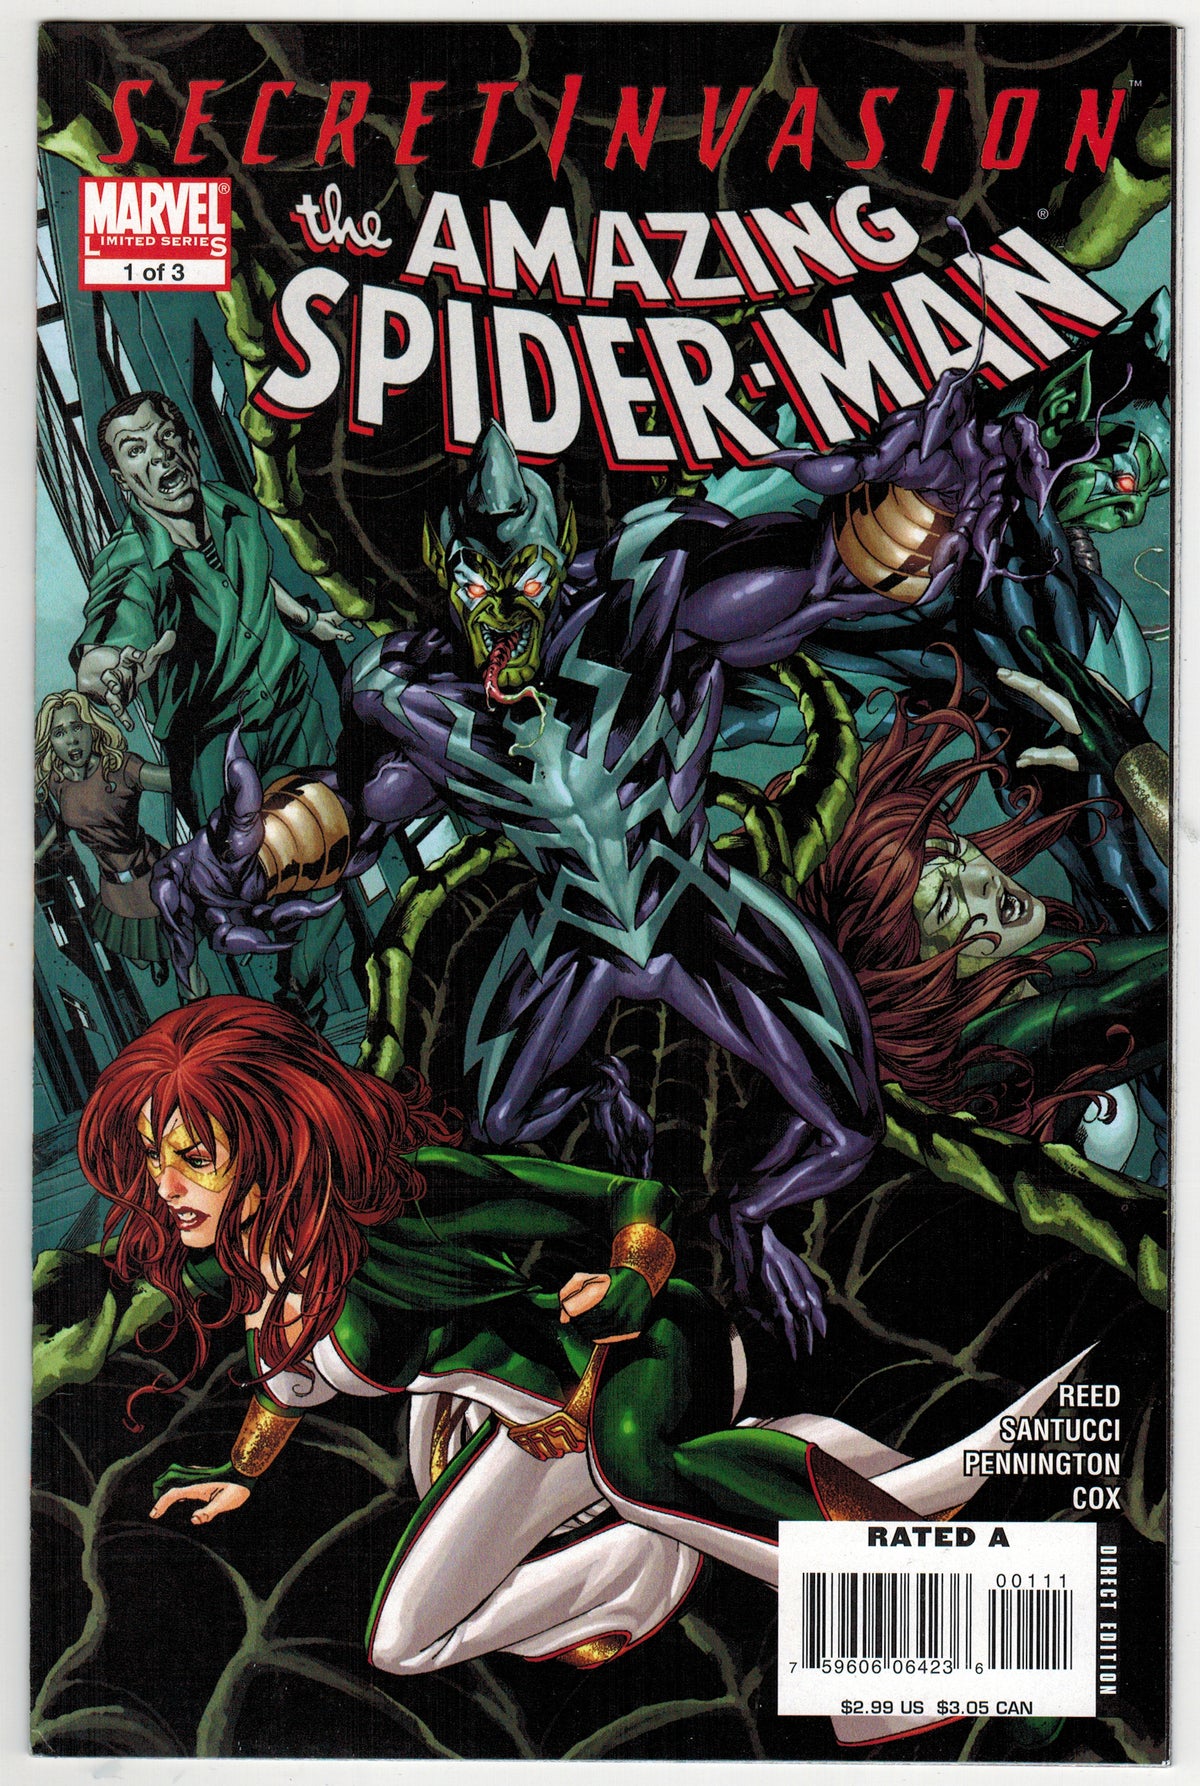 Photo of Secret Invasion: The Amazing Spider-Man (2008) Issue 1 - Near Mint Comic sold by Stronghold Collectibles